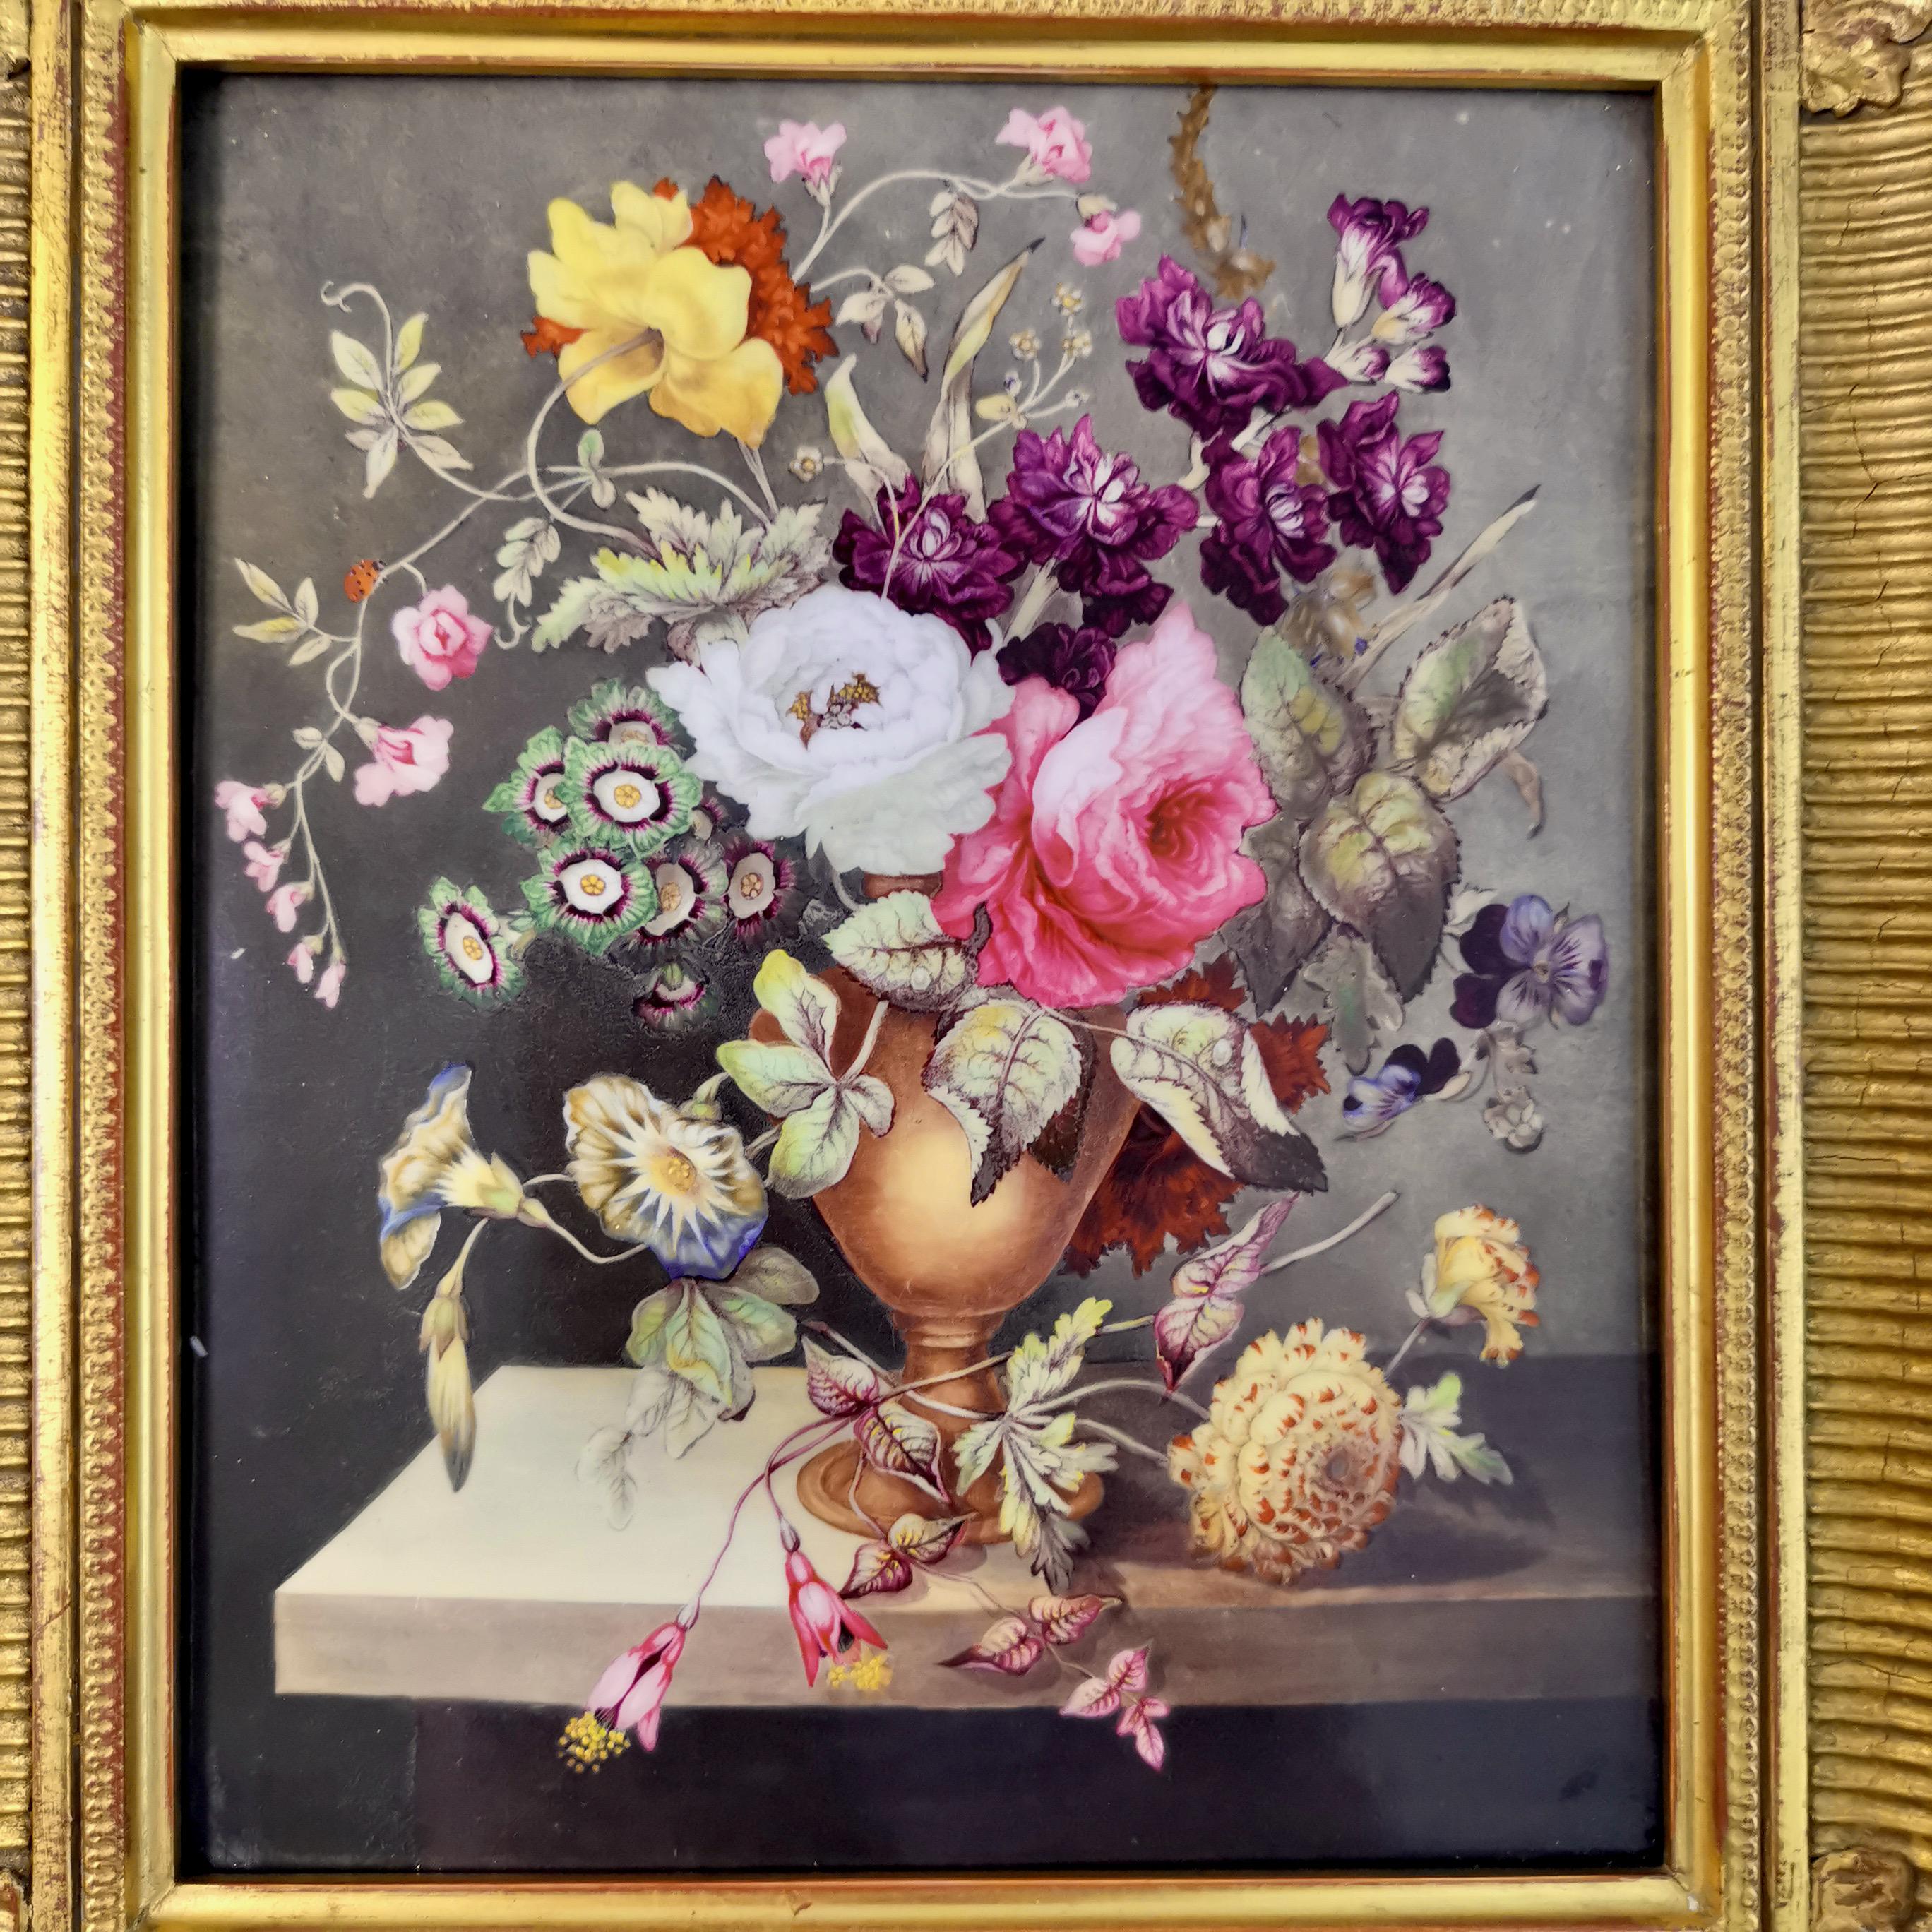 This is a beautiful porcelain plaque with a lavish flower bouquet, set in a gilt wood frame. It was made in England in about 1825.
 
This plaque has provenance: it once belonged to the Margaret Cadman Collection and it later belonged to the